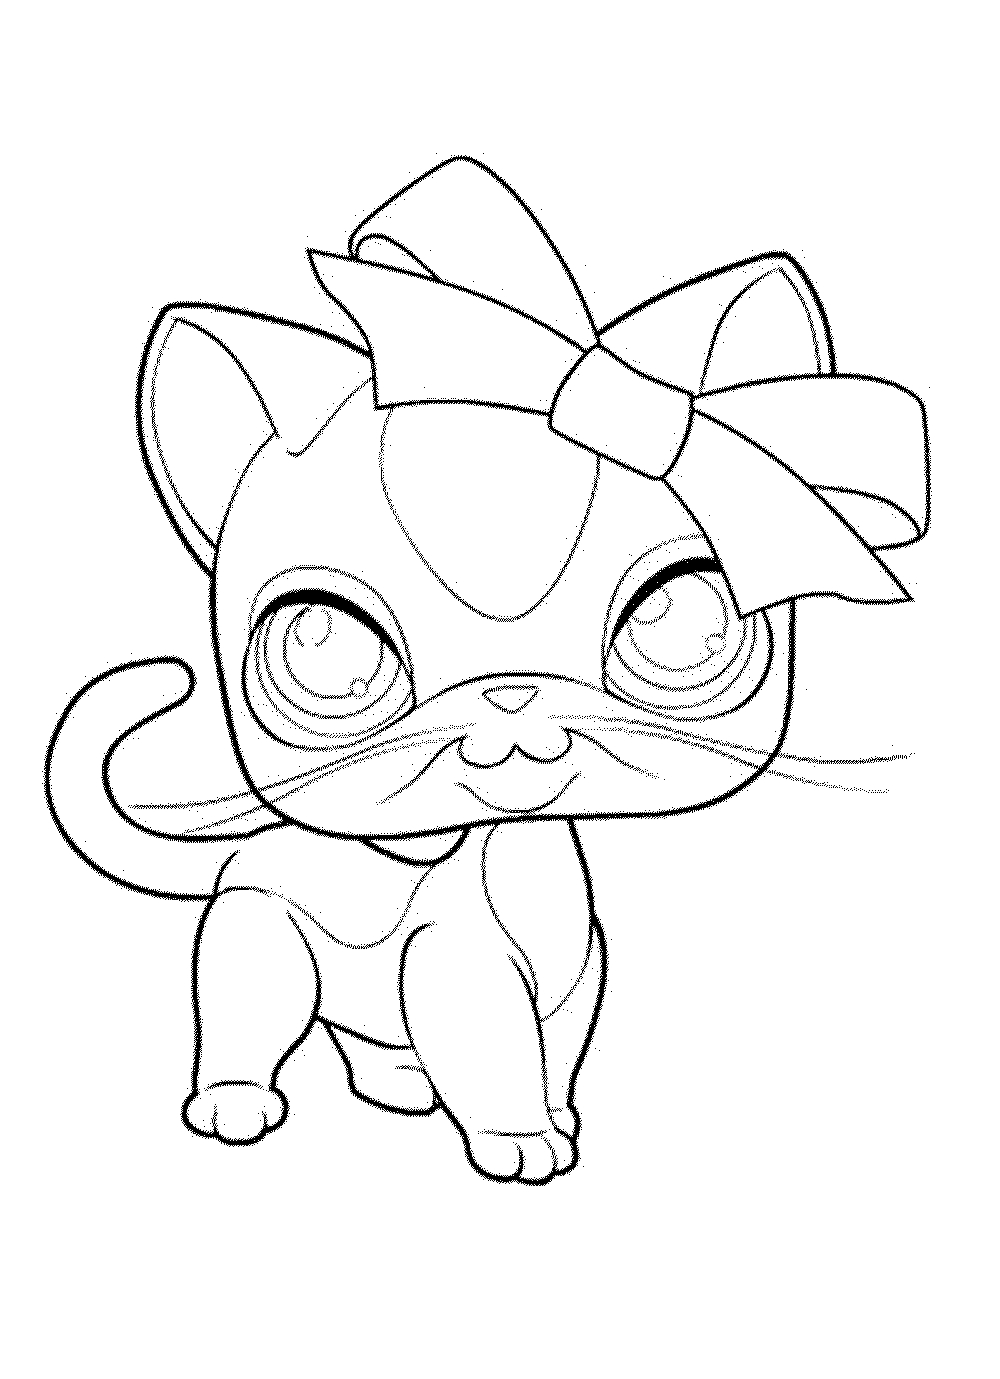 Lps Cat Coloring Pages at GetColorings.com | Free printable colorings